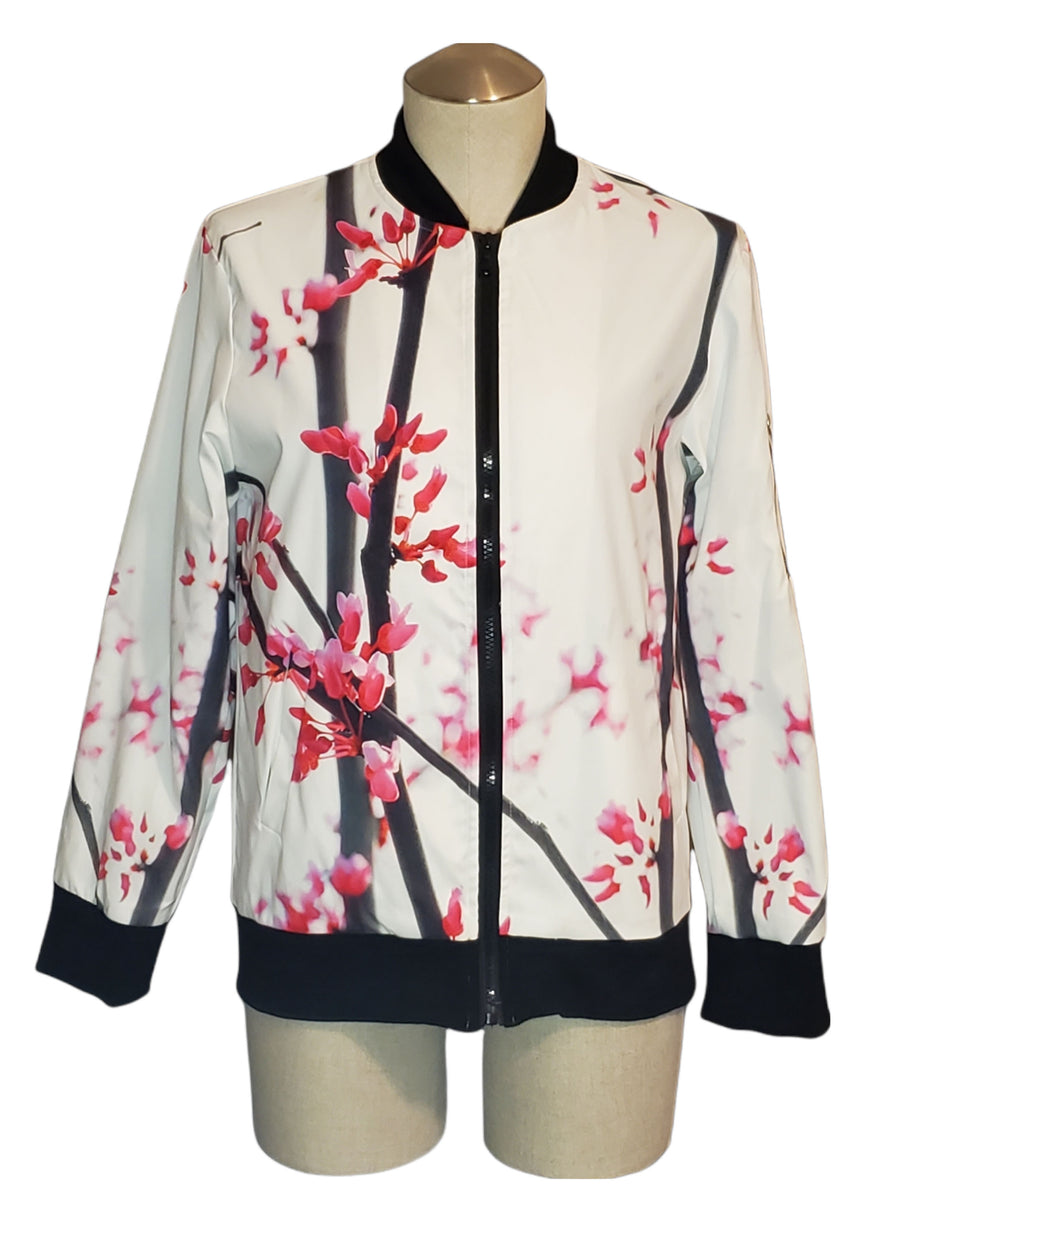 Cherry Tree Blossoms All-Over Print Women's Jacket